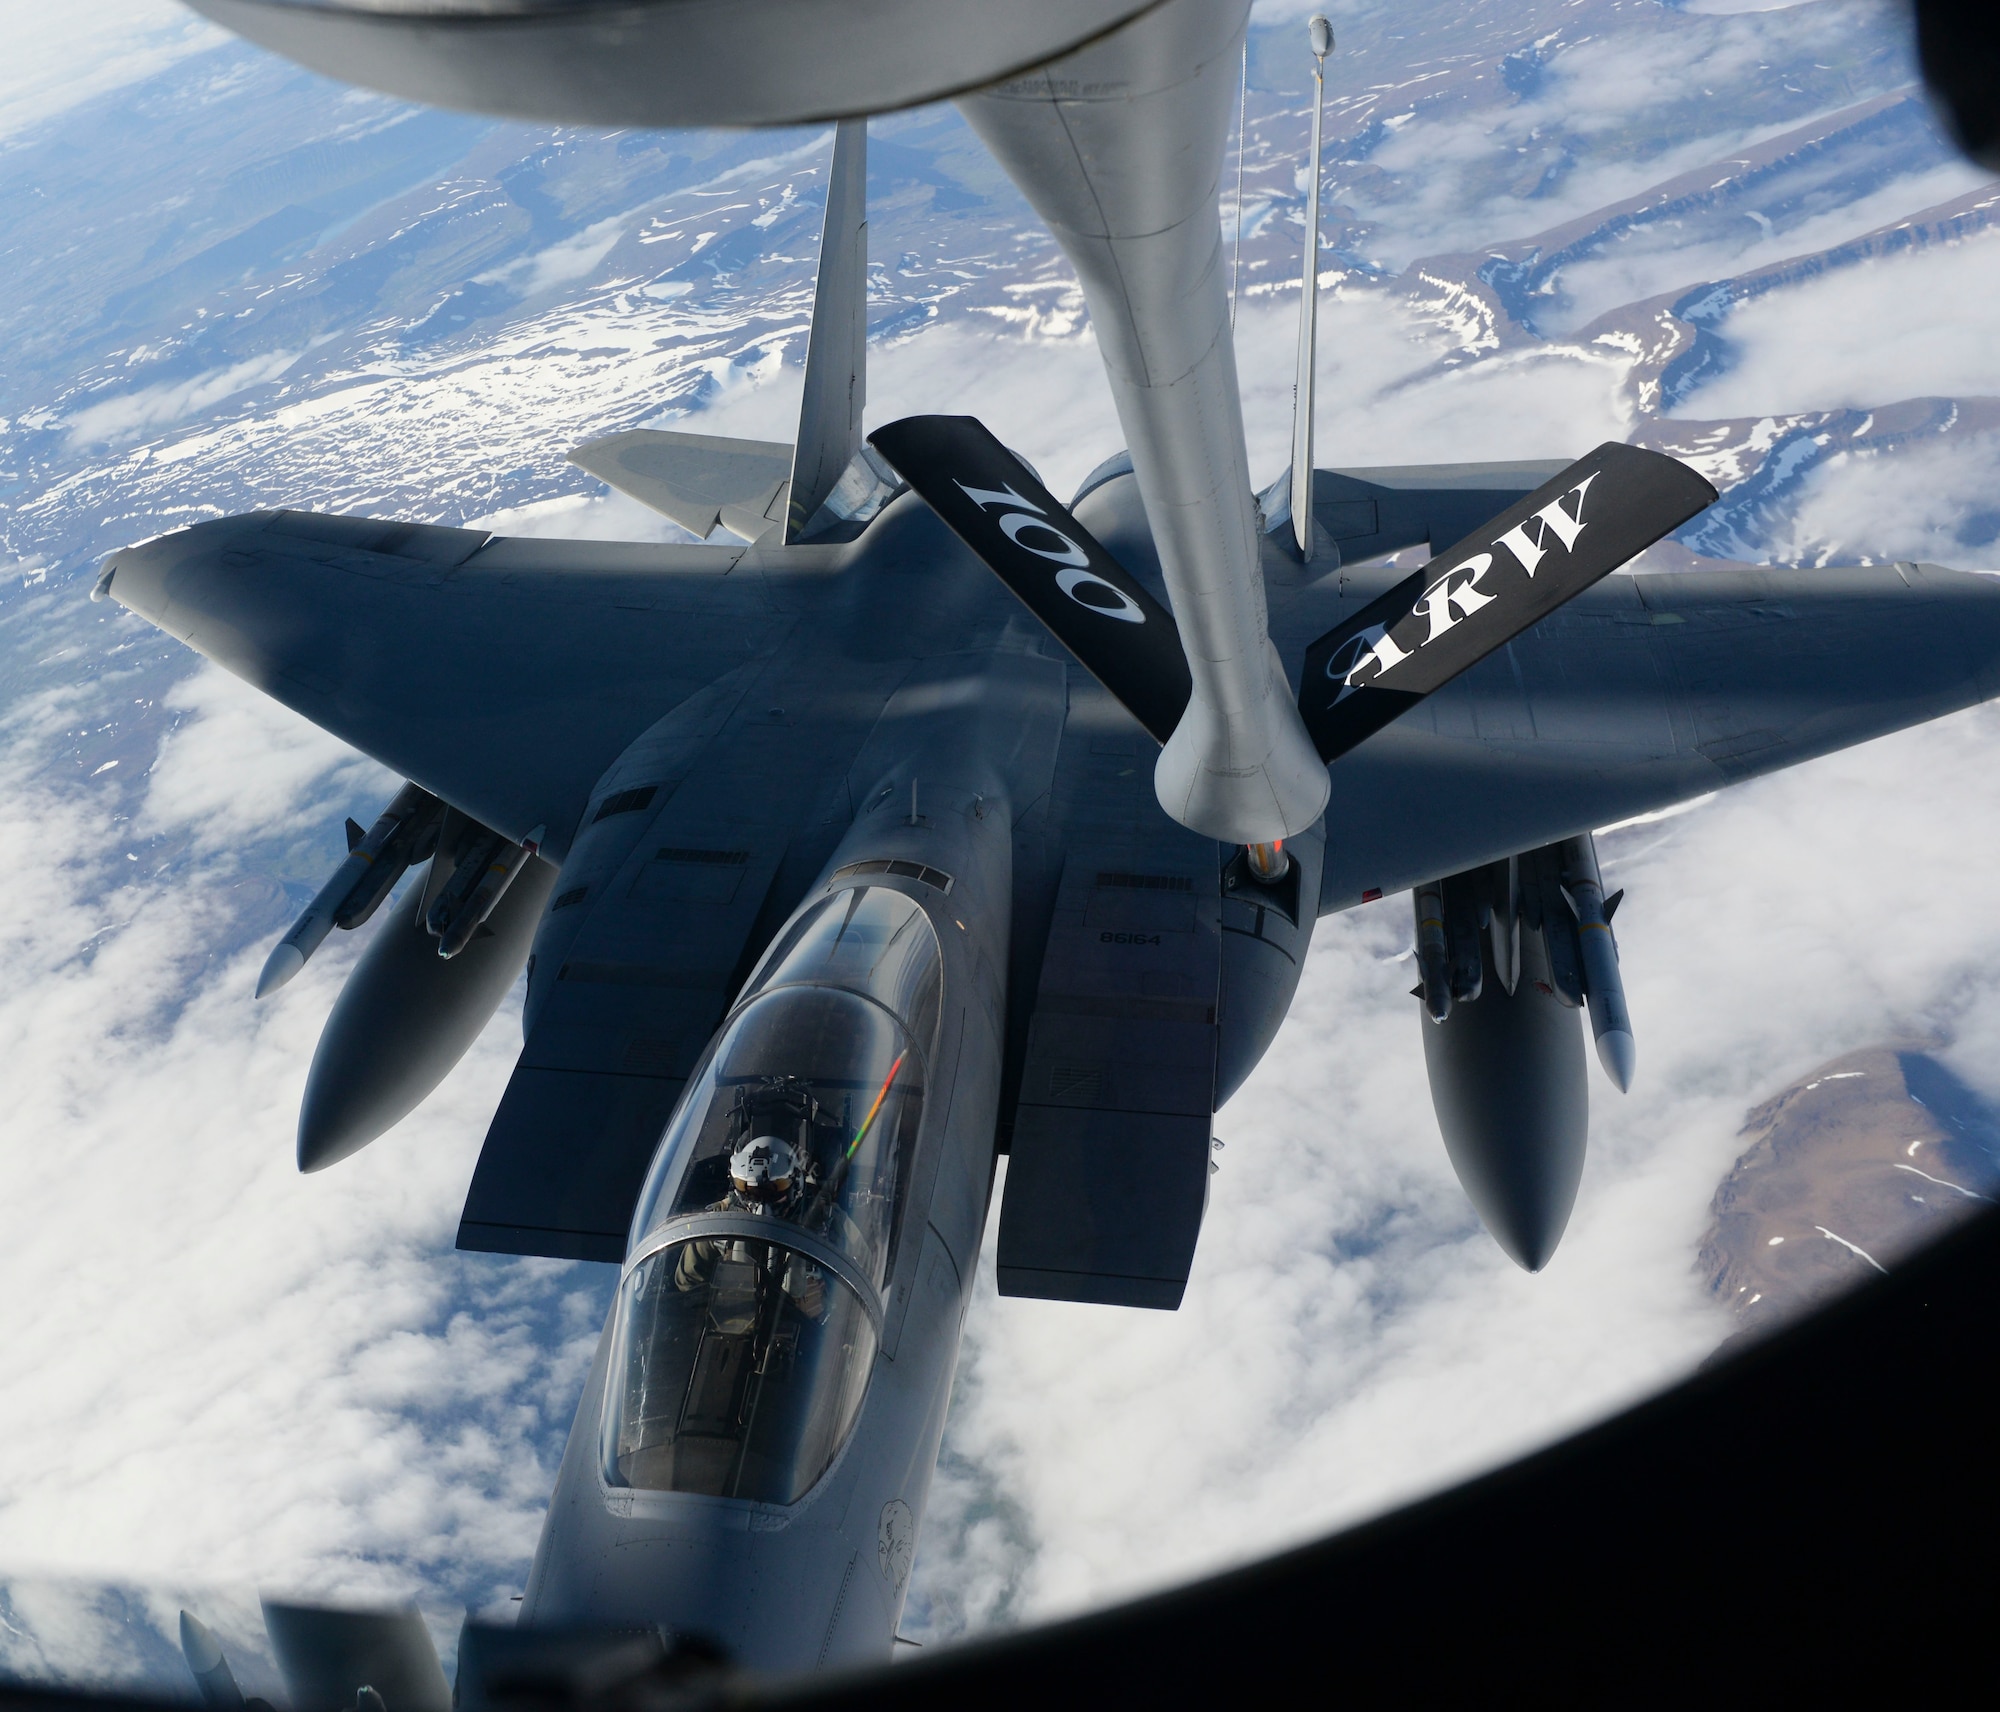 A U.S. Air Force F-15C Eagle assigned to the 493rd Expeditionary Fighter Squadron receives fuel from a KC-135 Stratotanker assigned to the 351st Air Refueling Squadron over Iceland, Aug. 10, 2018. Successful international operations are a testament to the cooperative efforts and enduring relationship between the U.S., allies and partner nations. (U.S. Air Force photo by Airman 1st Class Alexandria Lee)